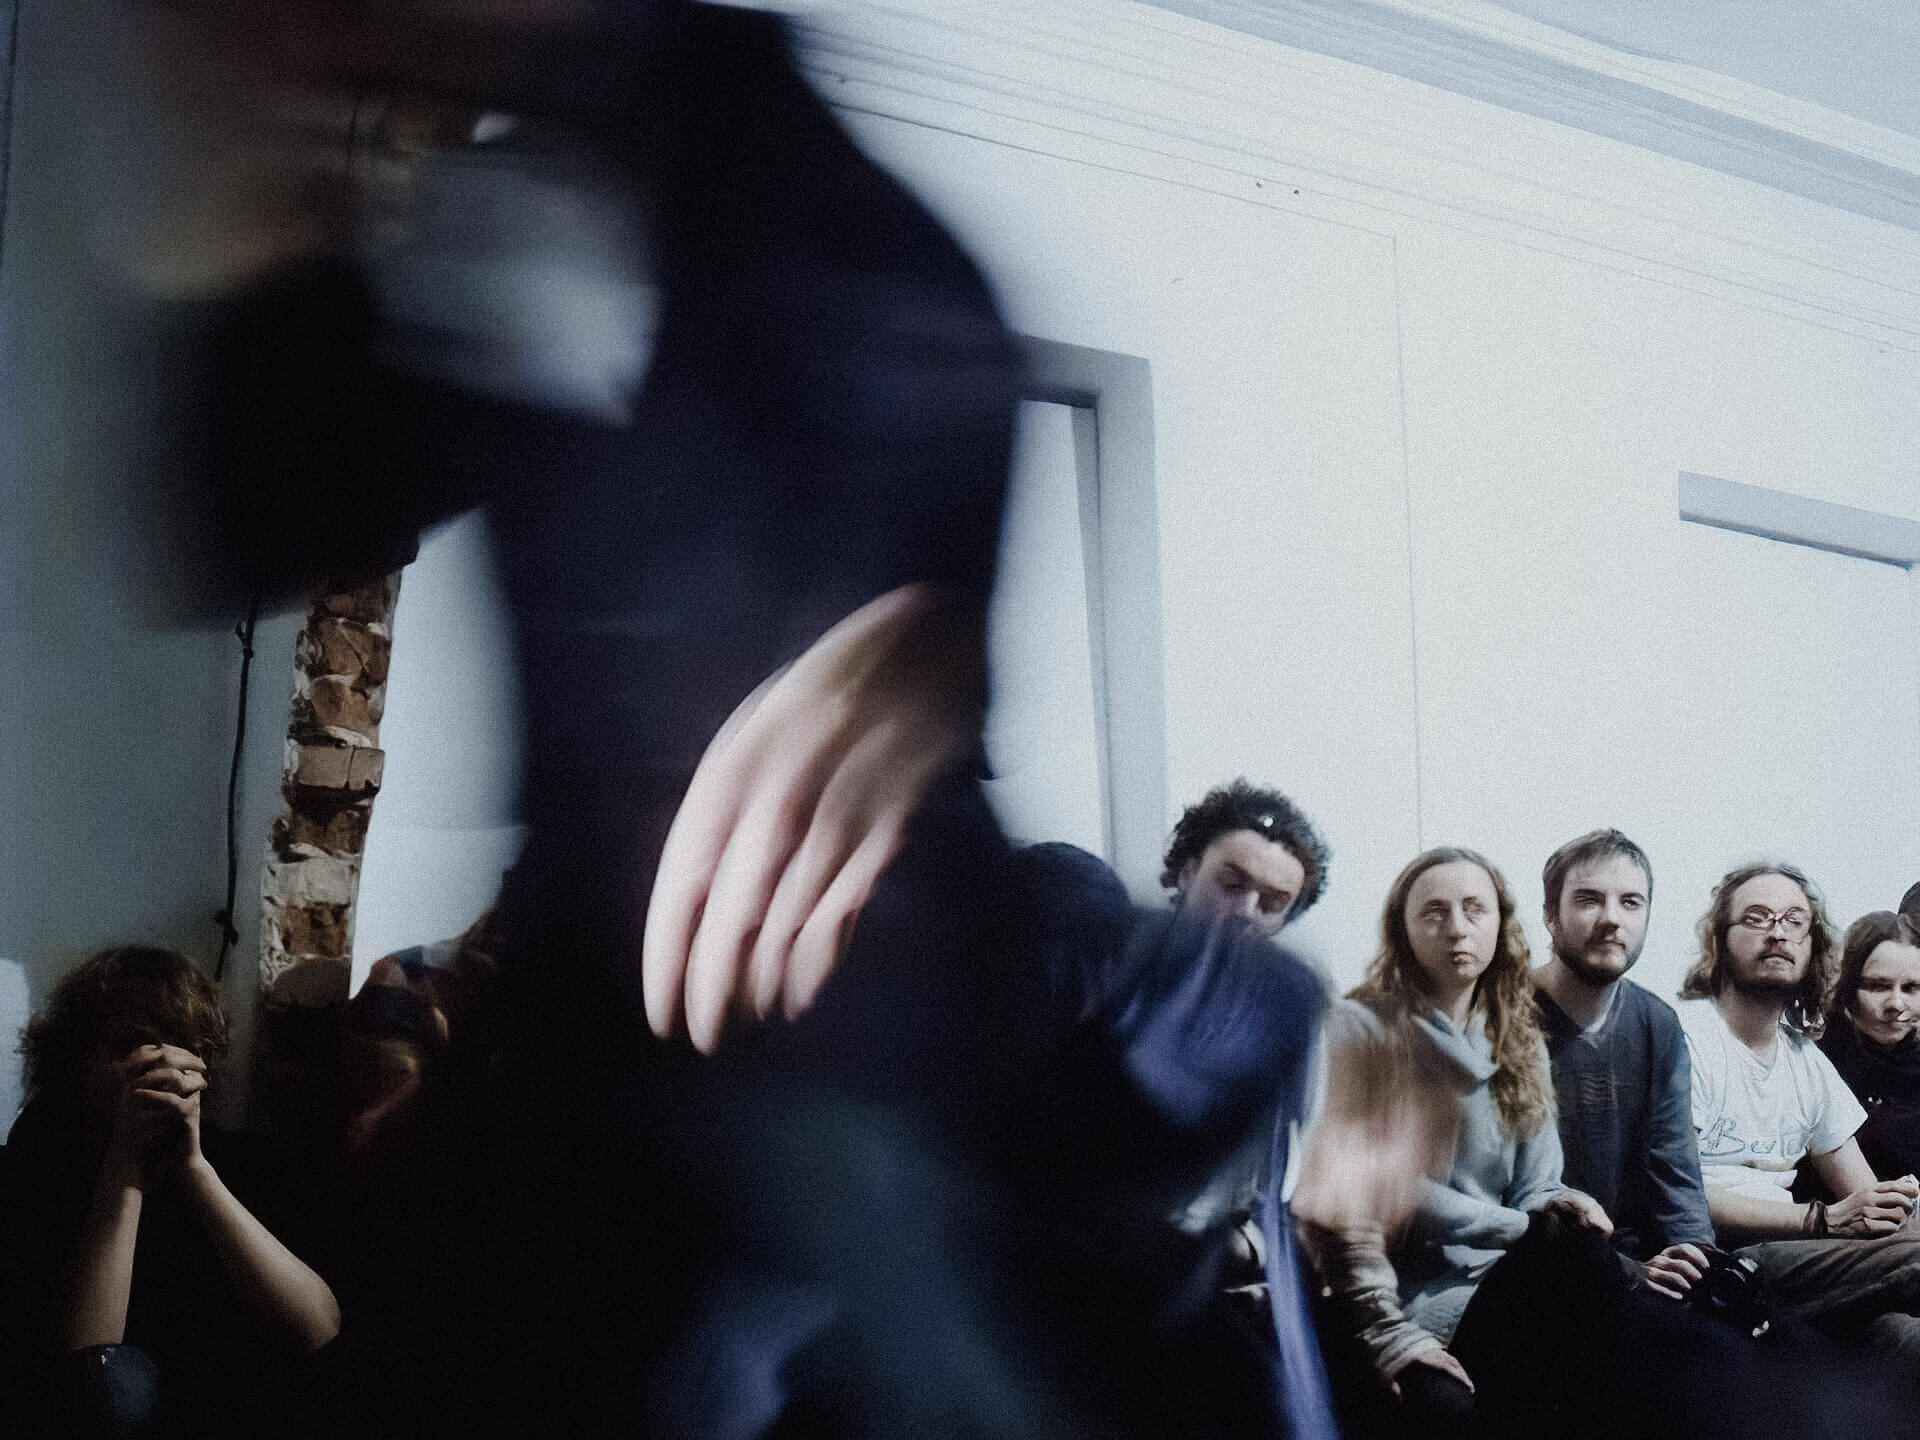 Blurry image of a performer moving. The movement is so fast that it is hard to tell what is happening.